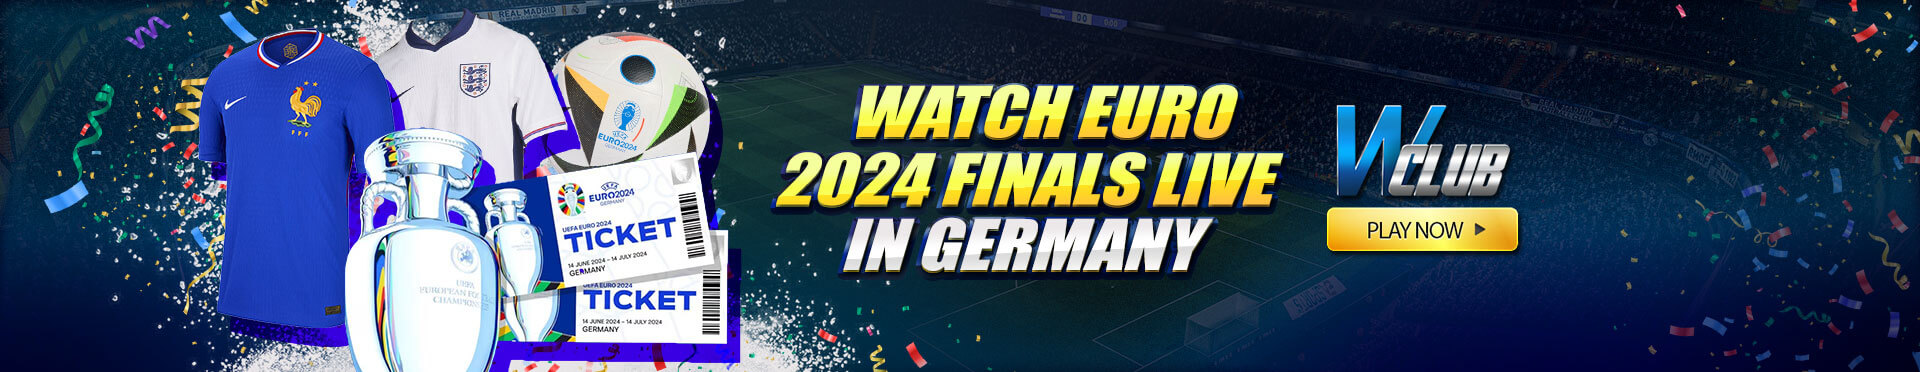 Watch Euro 2024 Finals Live In Germany